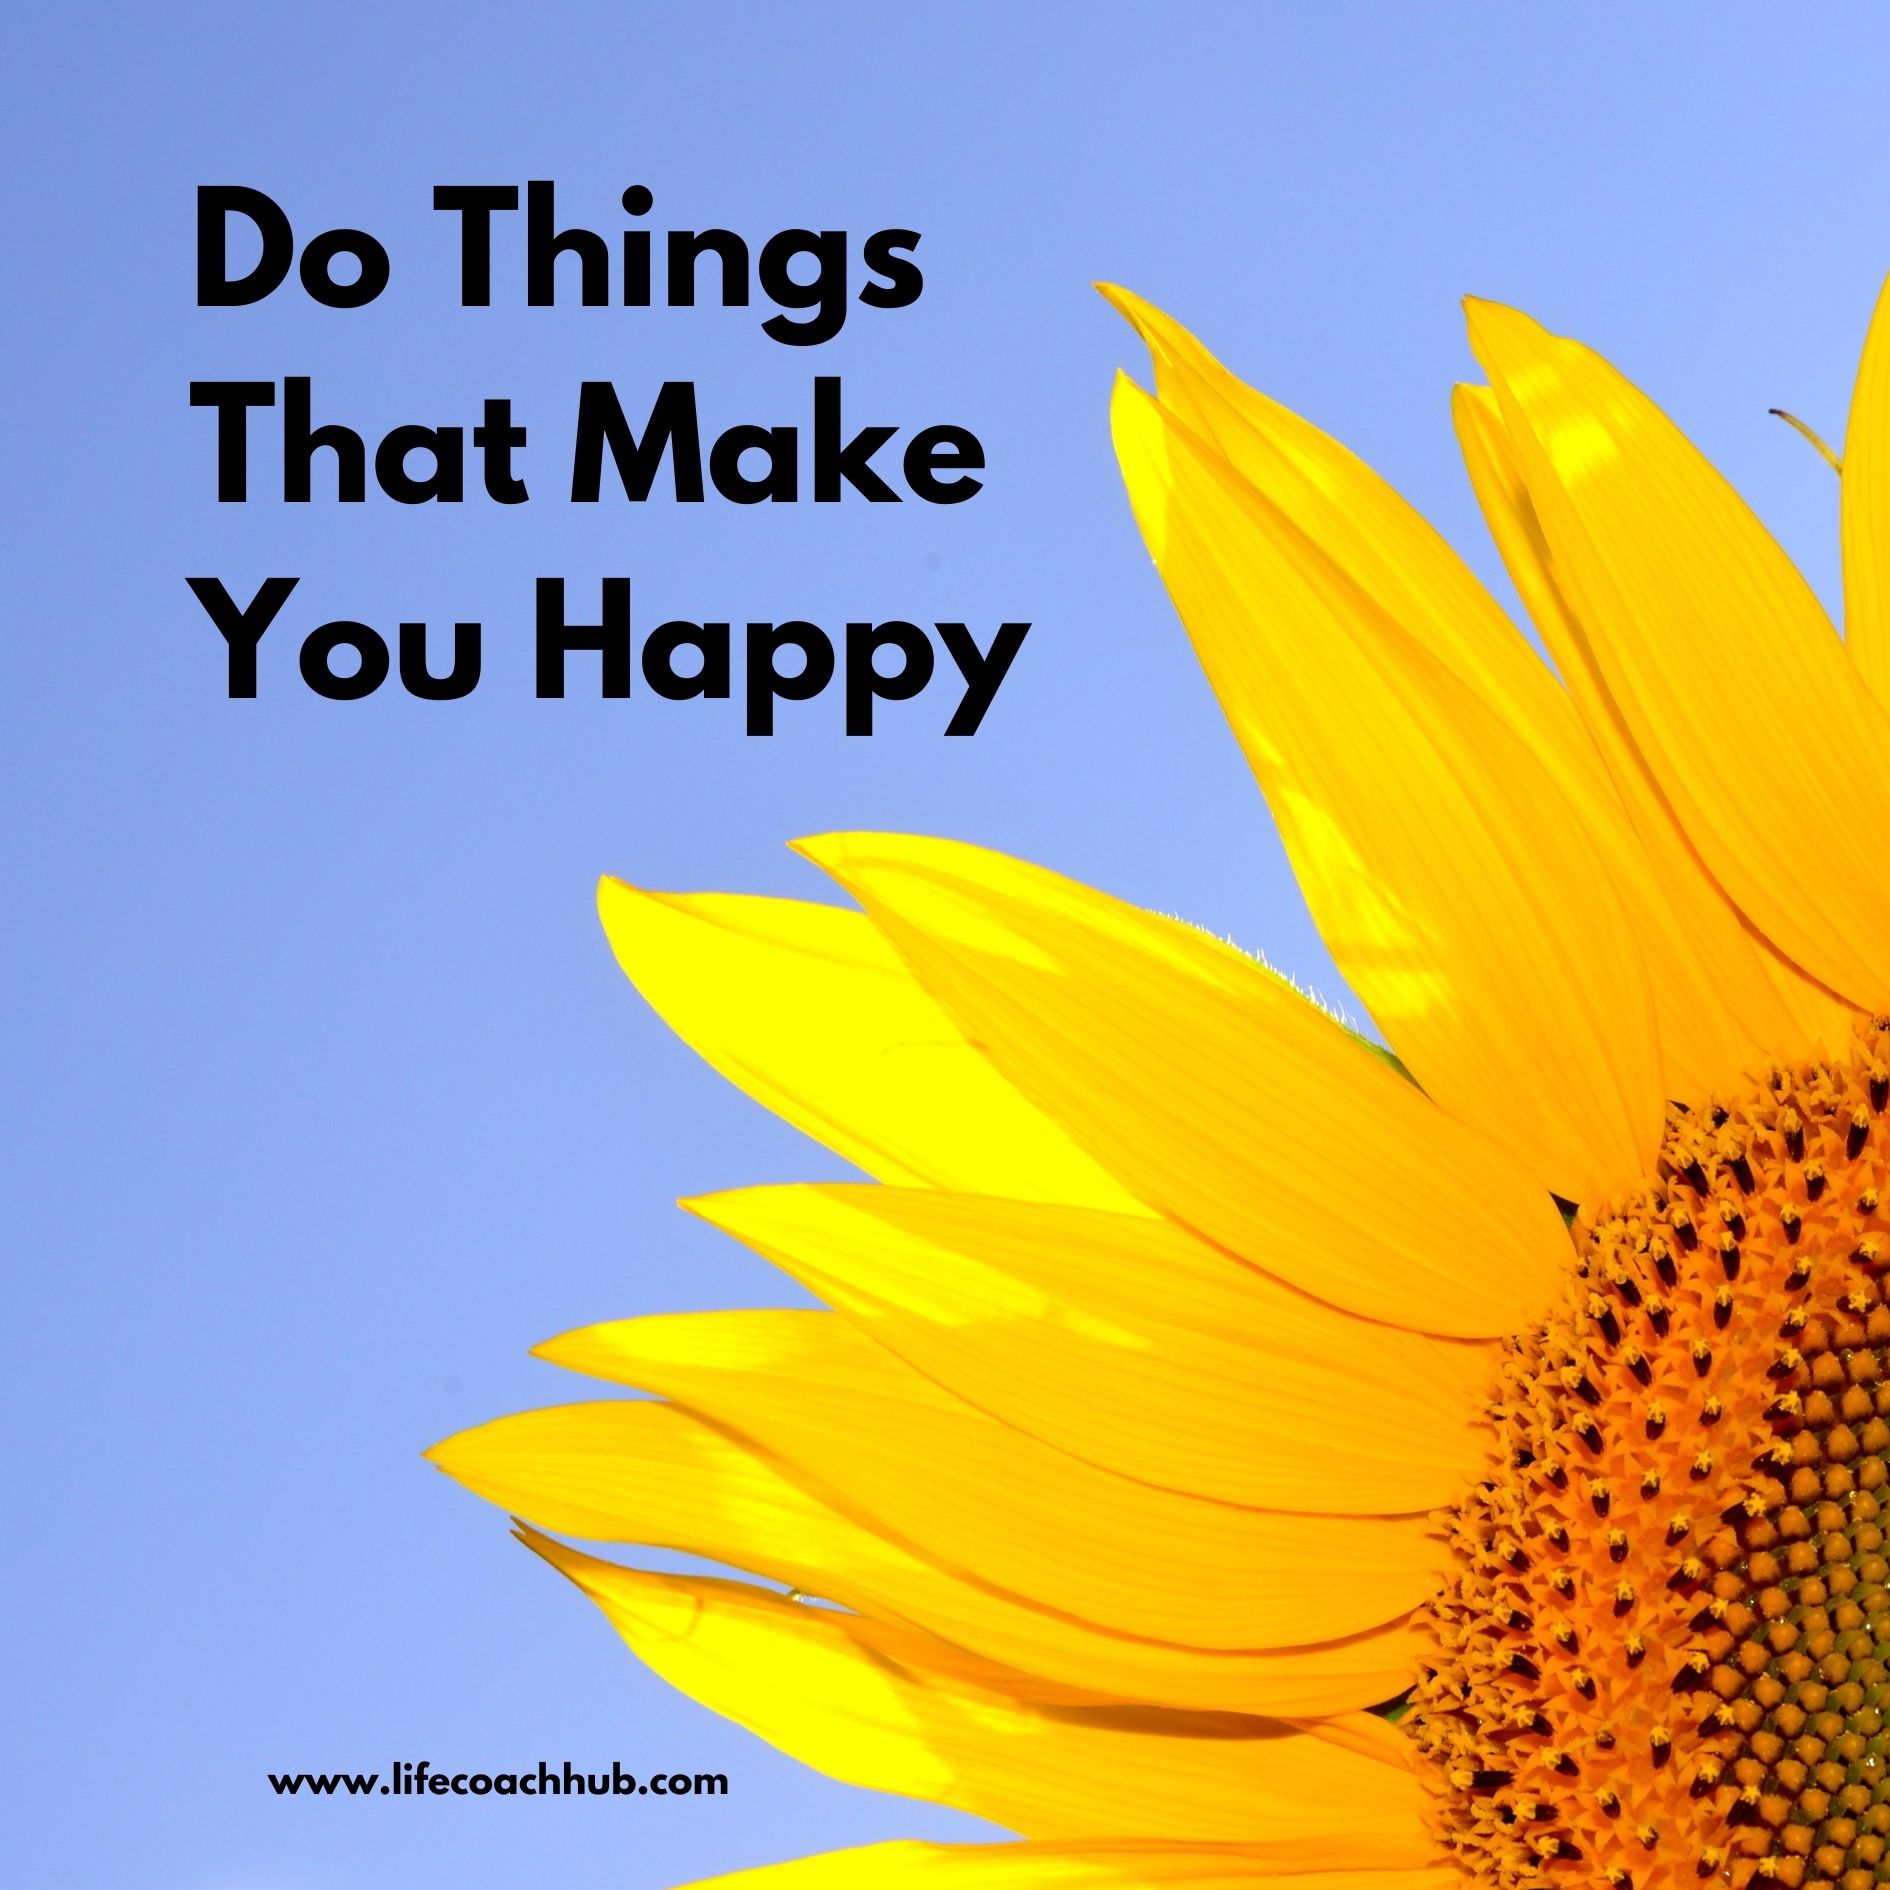 Do Things That Make You Happy